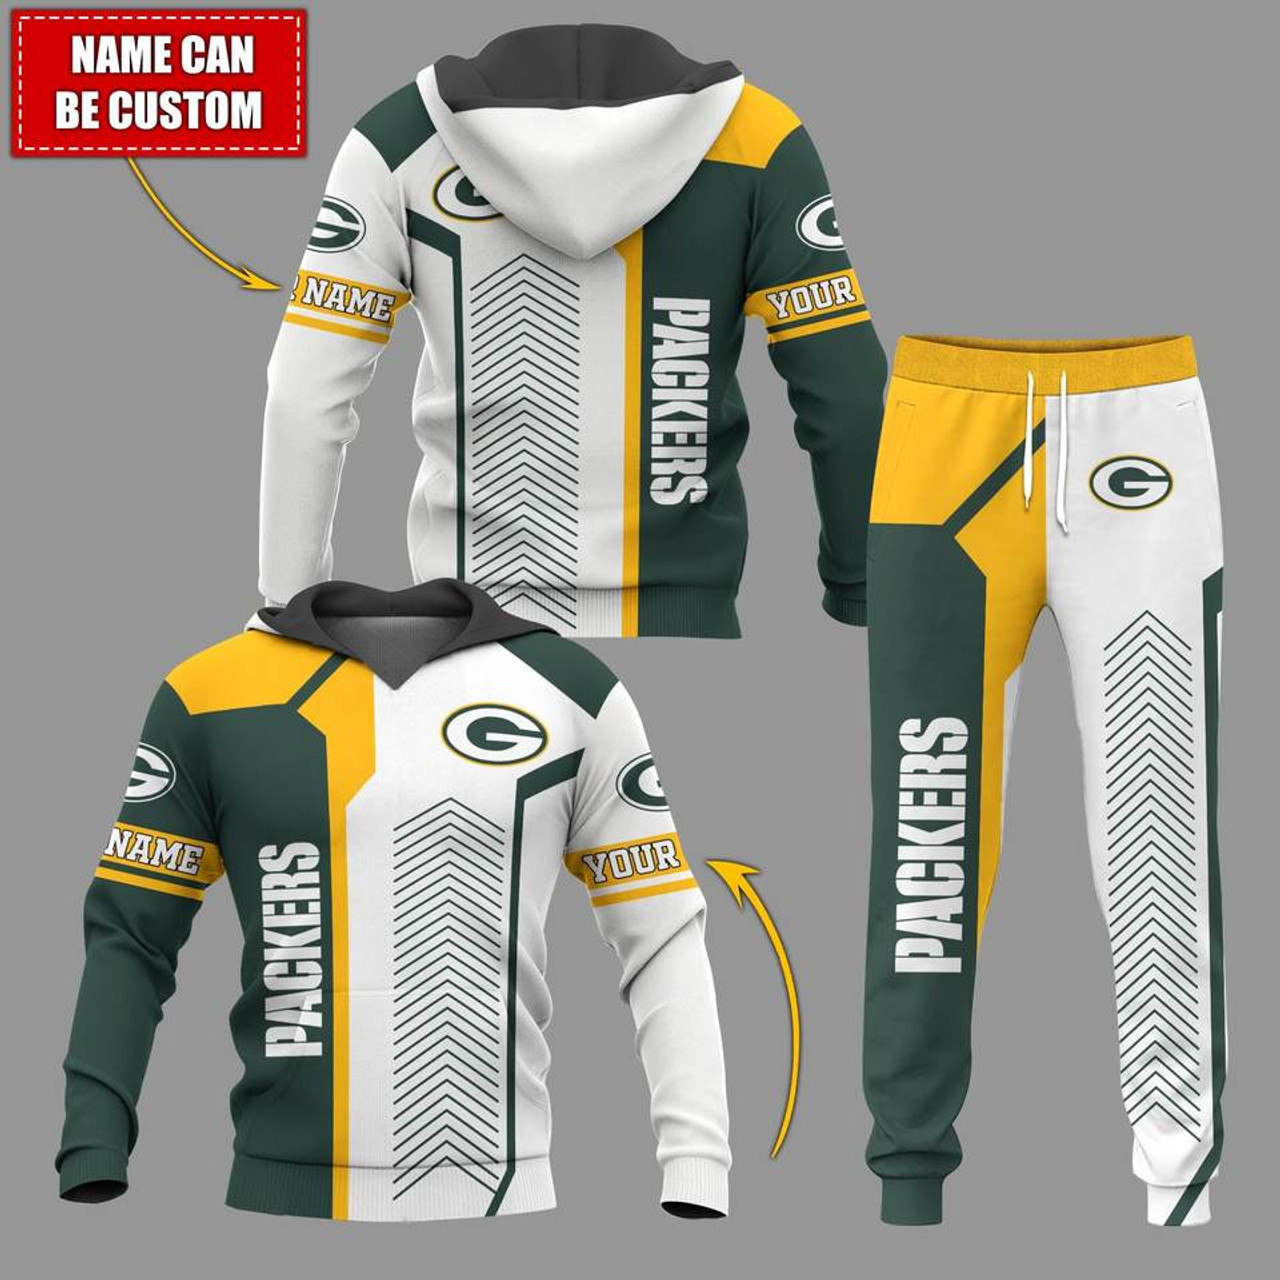 **(N.F.L.GREEN-BAY-PACKERS-TEAM-PULLOVER-HOODIES & TEAM-SWEATPANTS-SET/OFFICIAL-CUSTOM-PACKERS-TEAM-LOGOS & OFFICIAL-PACKERS-TEAM-COLORS/ADD-YOUR-OWN-PERSONALIZED-NAME-OR-CUSTOMIZED-TEXT/WARM-PREMIUM-N.F.L.PACKERS-TEAM-COMBO-SET)**